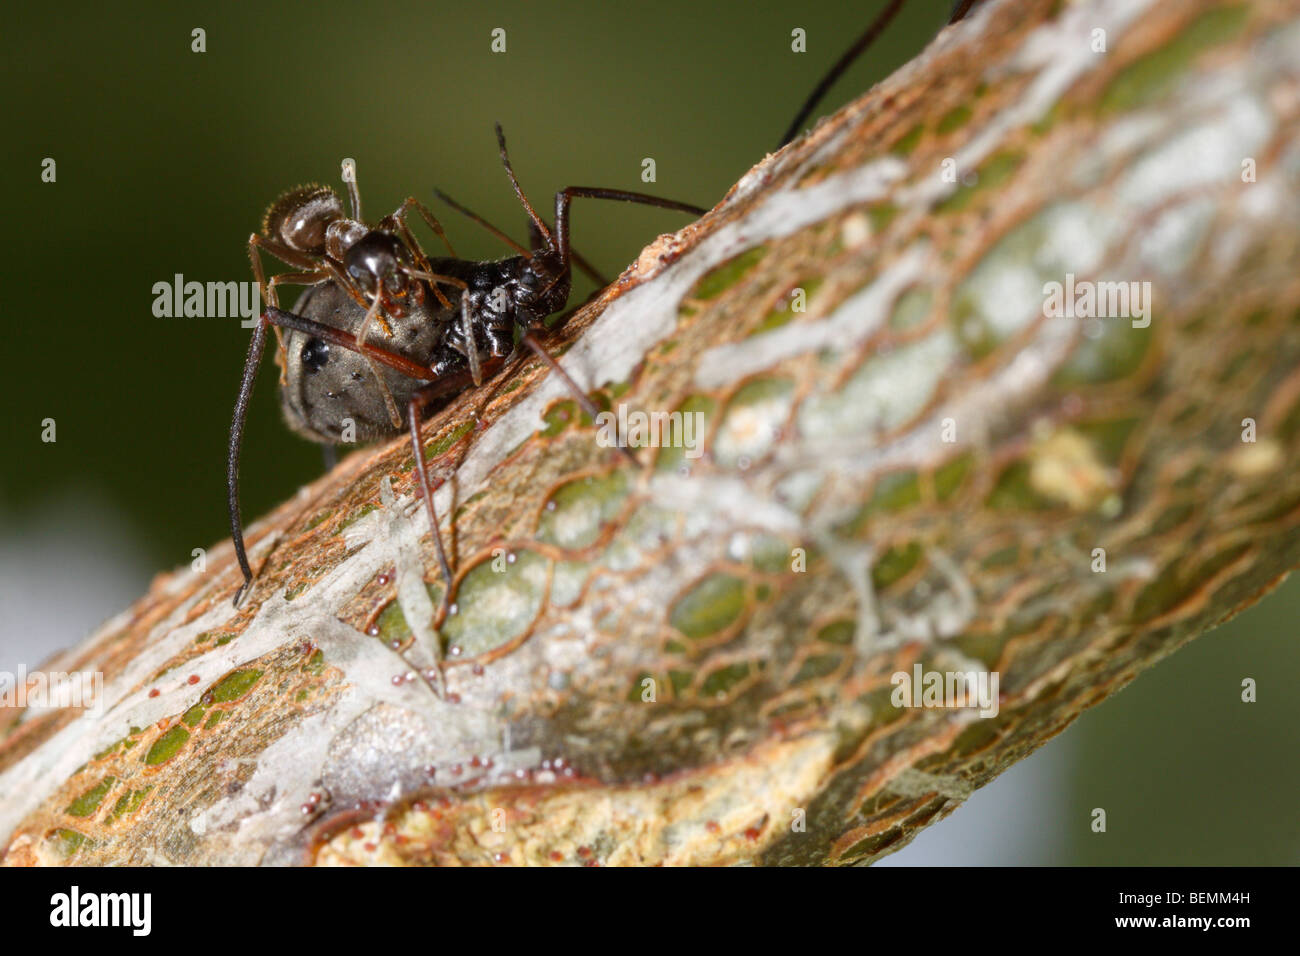 Lachnus roboris, an aphid that feeds on oak. This animal is being guarded by a Black Garden Ant (Lasius niger). Stock Photo